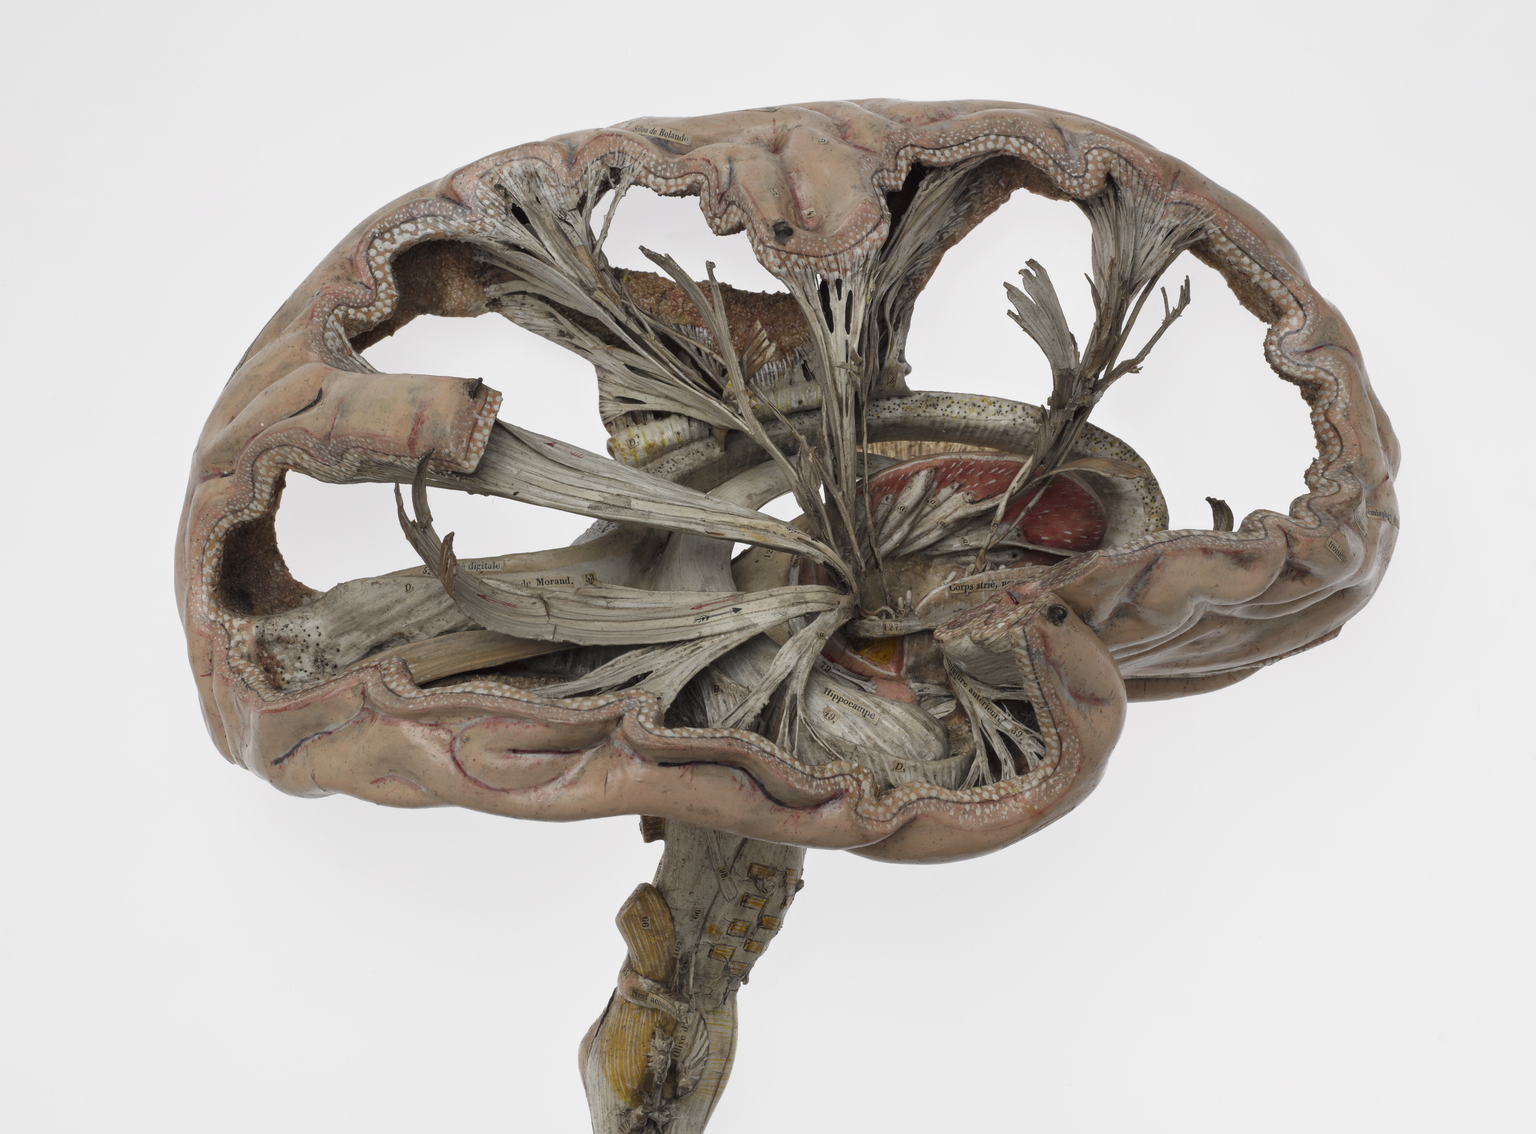 Model of a human brain, sectioned, French, first half 19th century.